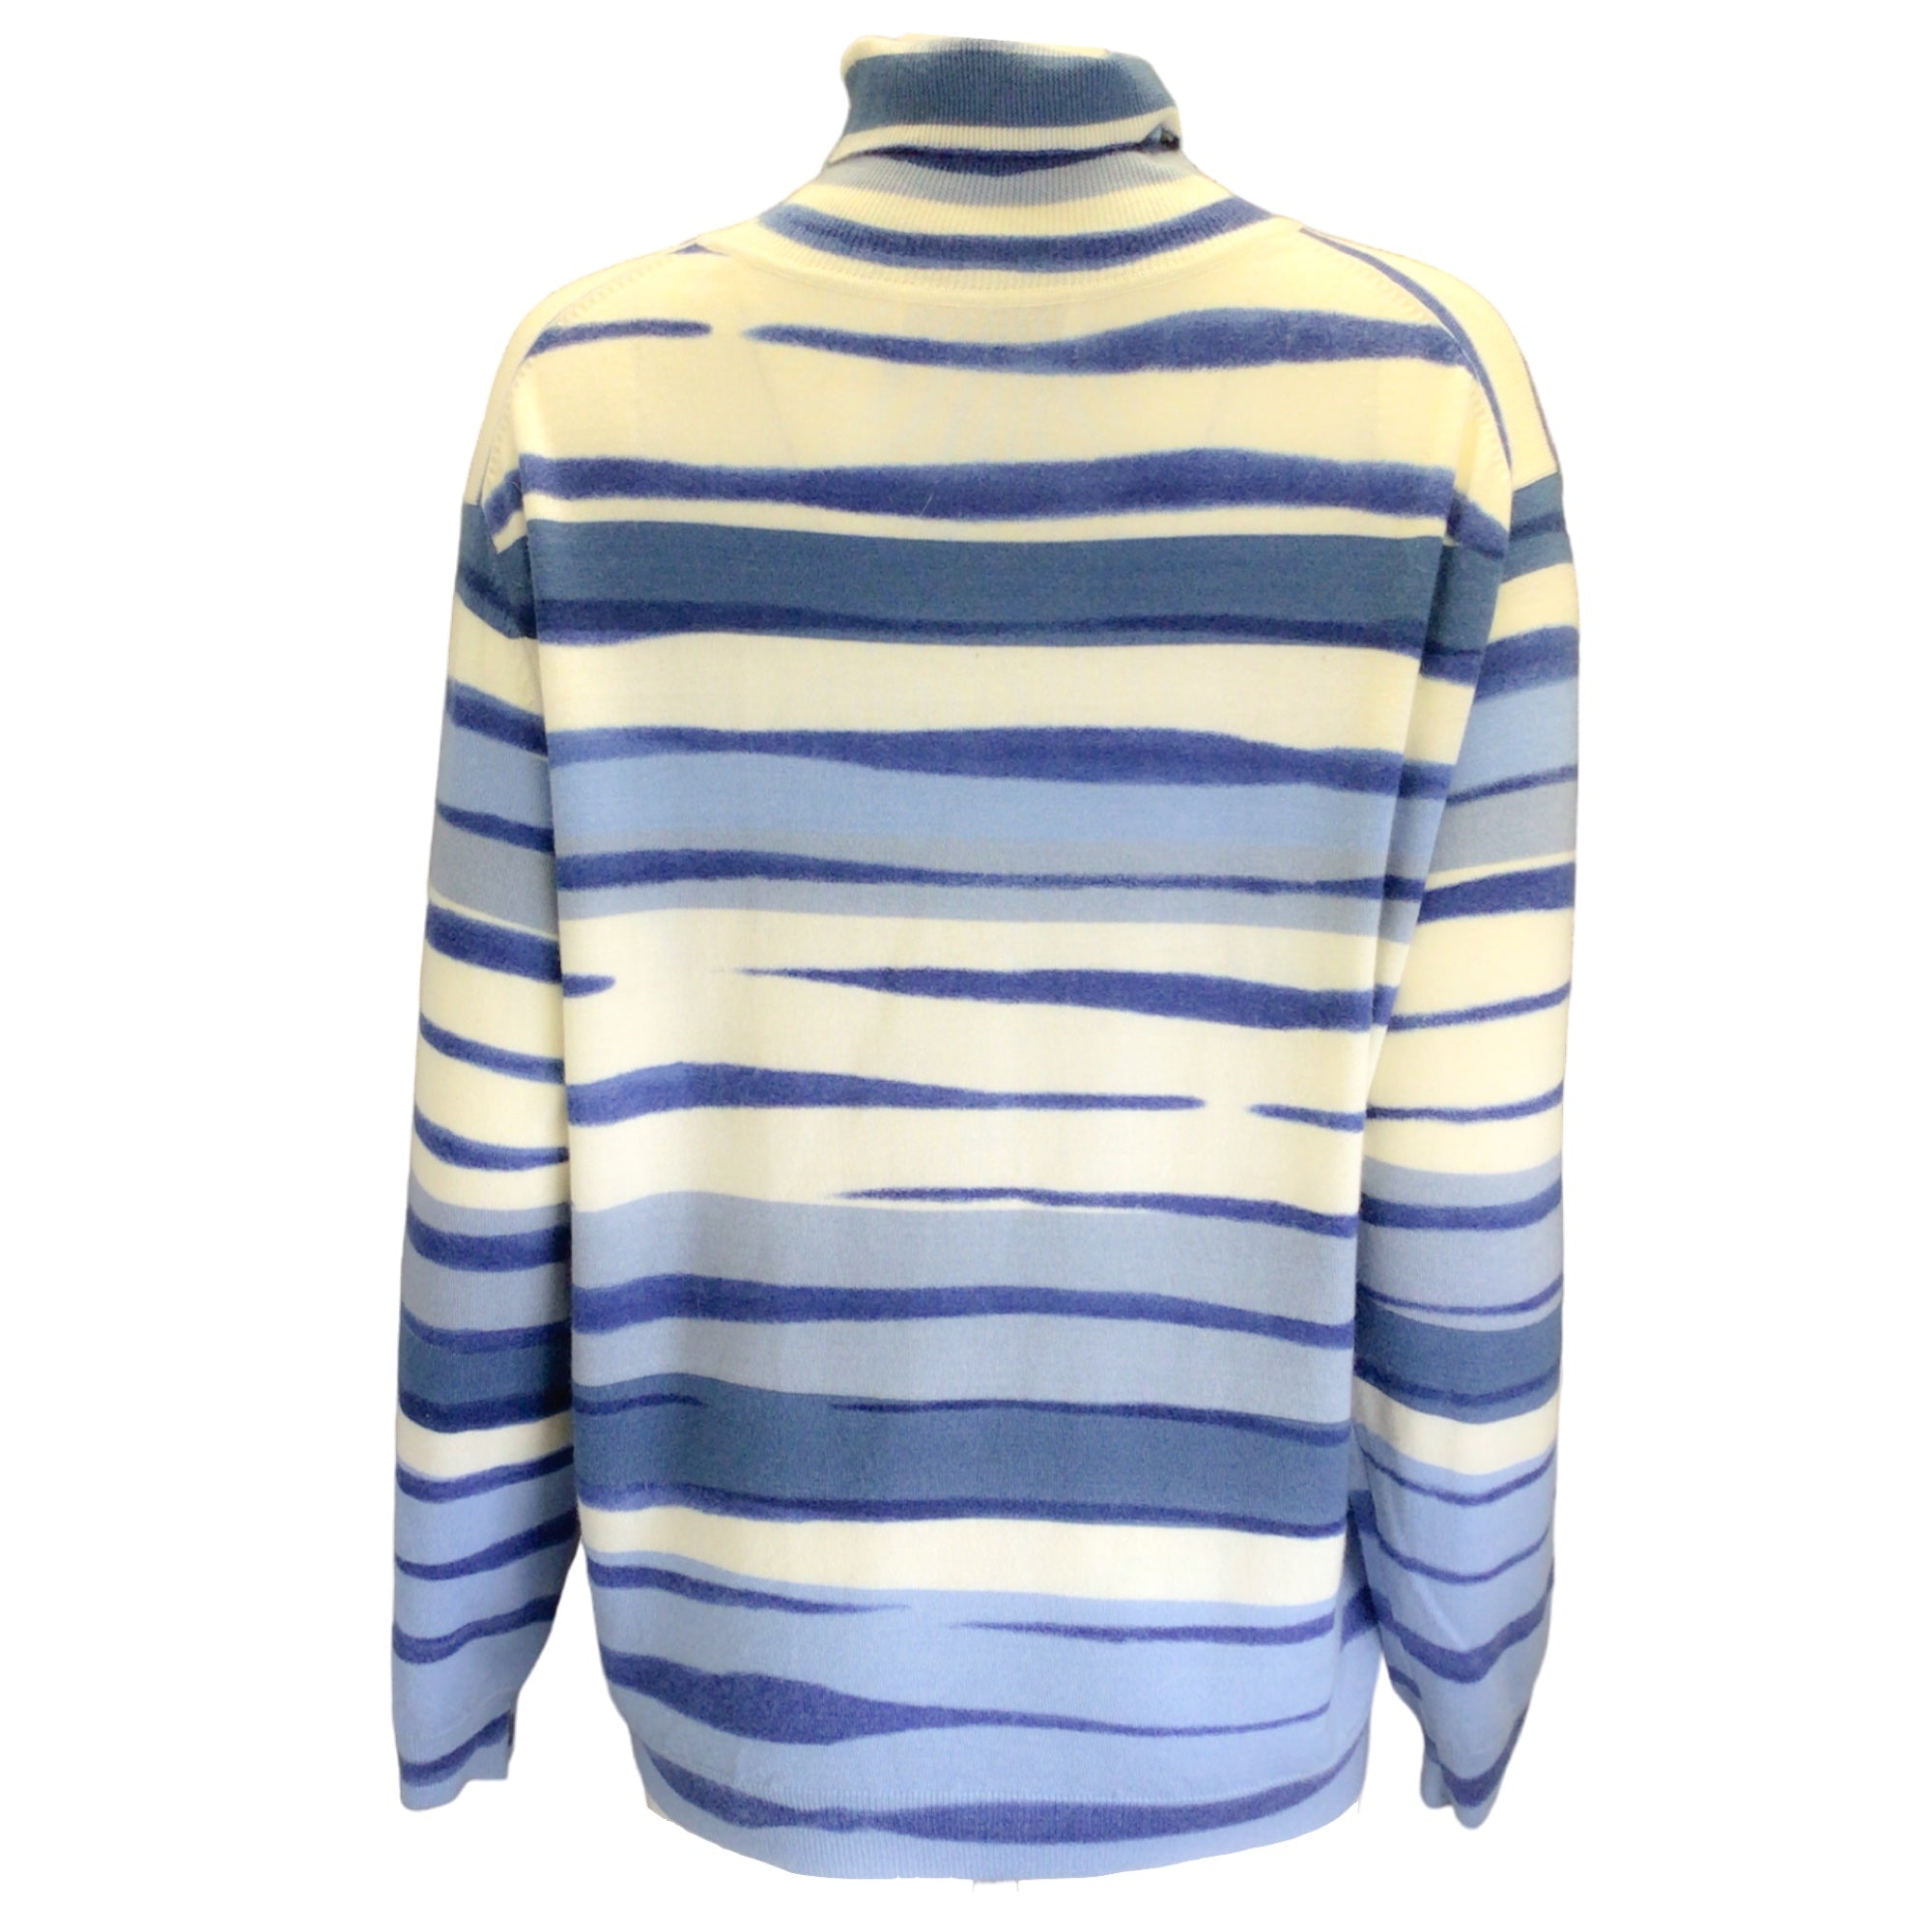 Prabal Gurung Blue / Ivory Striped Long Sleeved Wool and Cashmere Knit Turtleneck Sweater